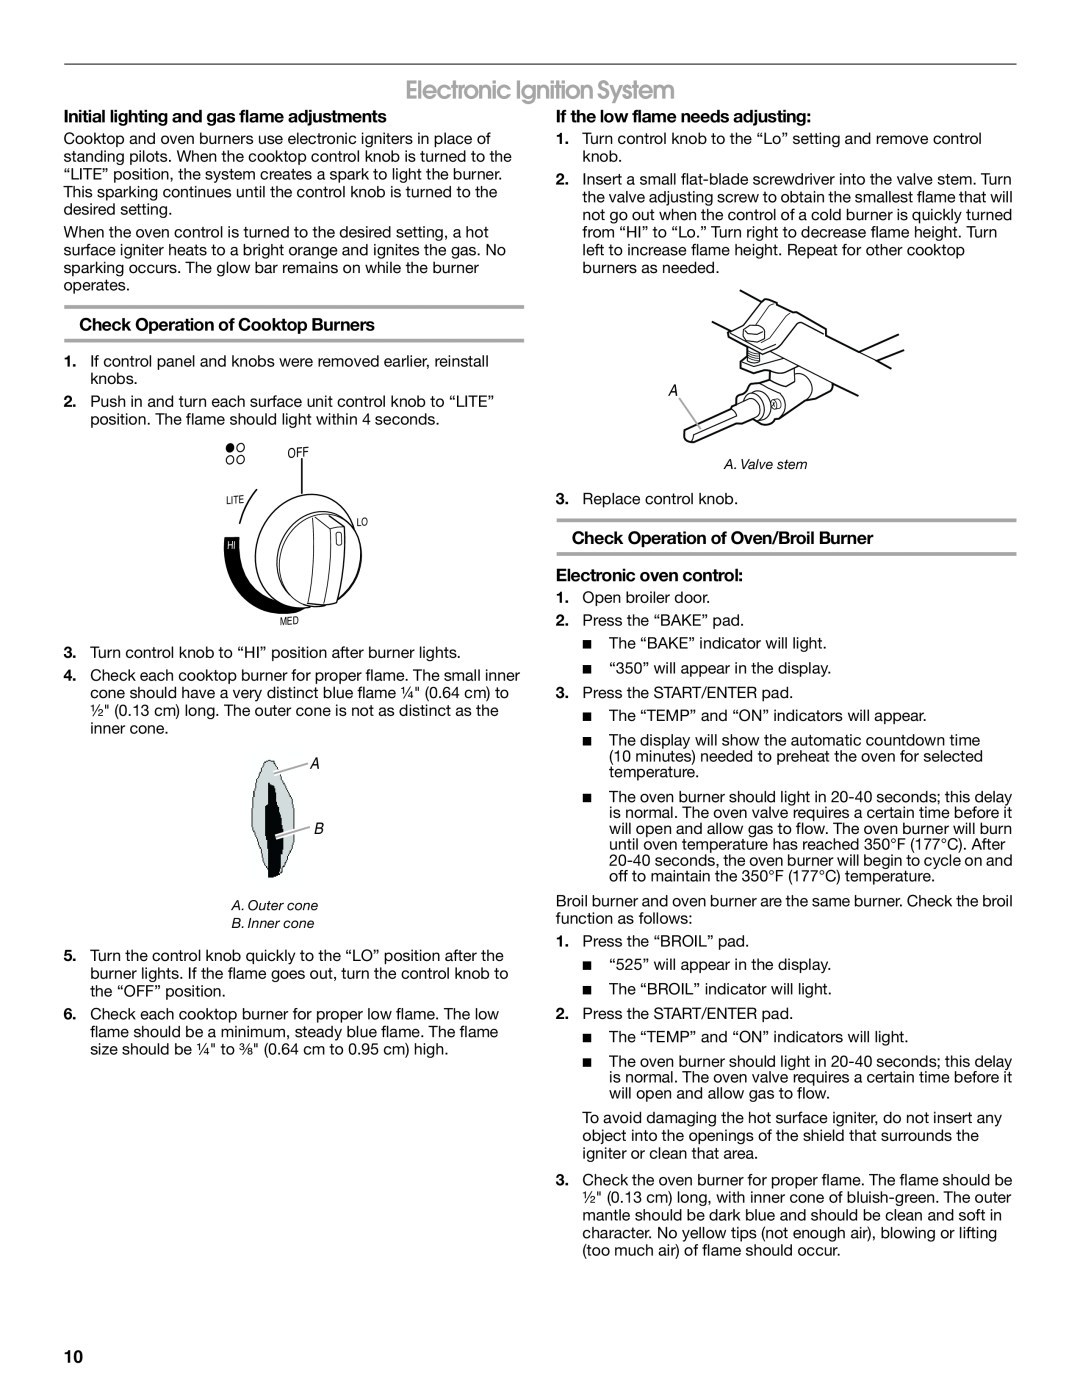 Whirlpool W10032050B installation instructions Electronic Ignition System, Initial lighting and gas flame adjustments 